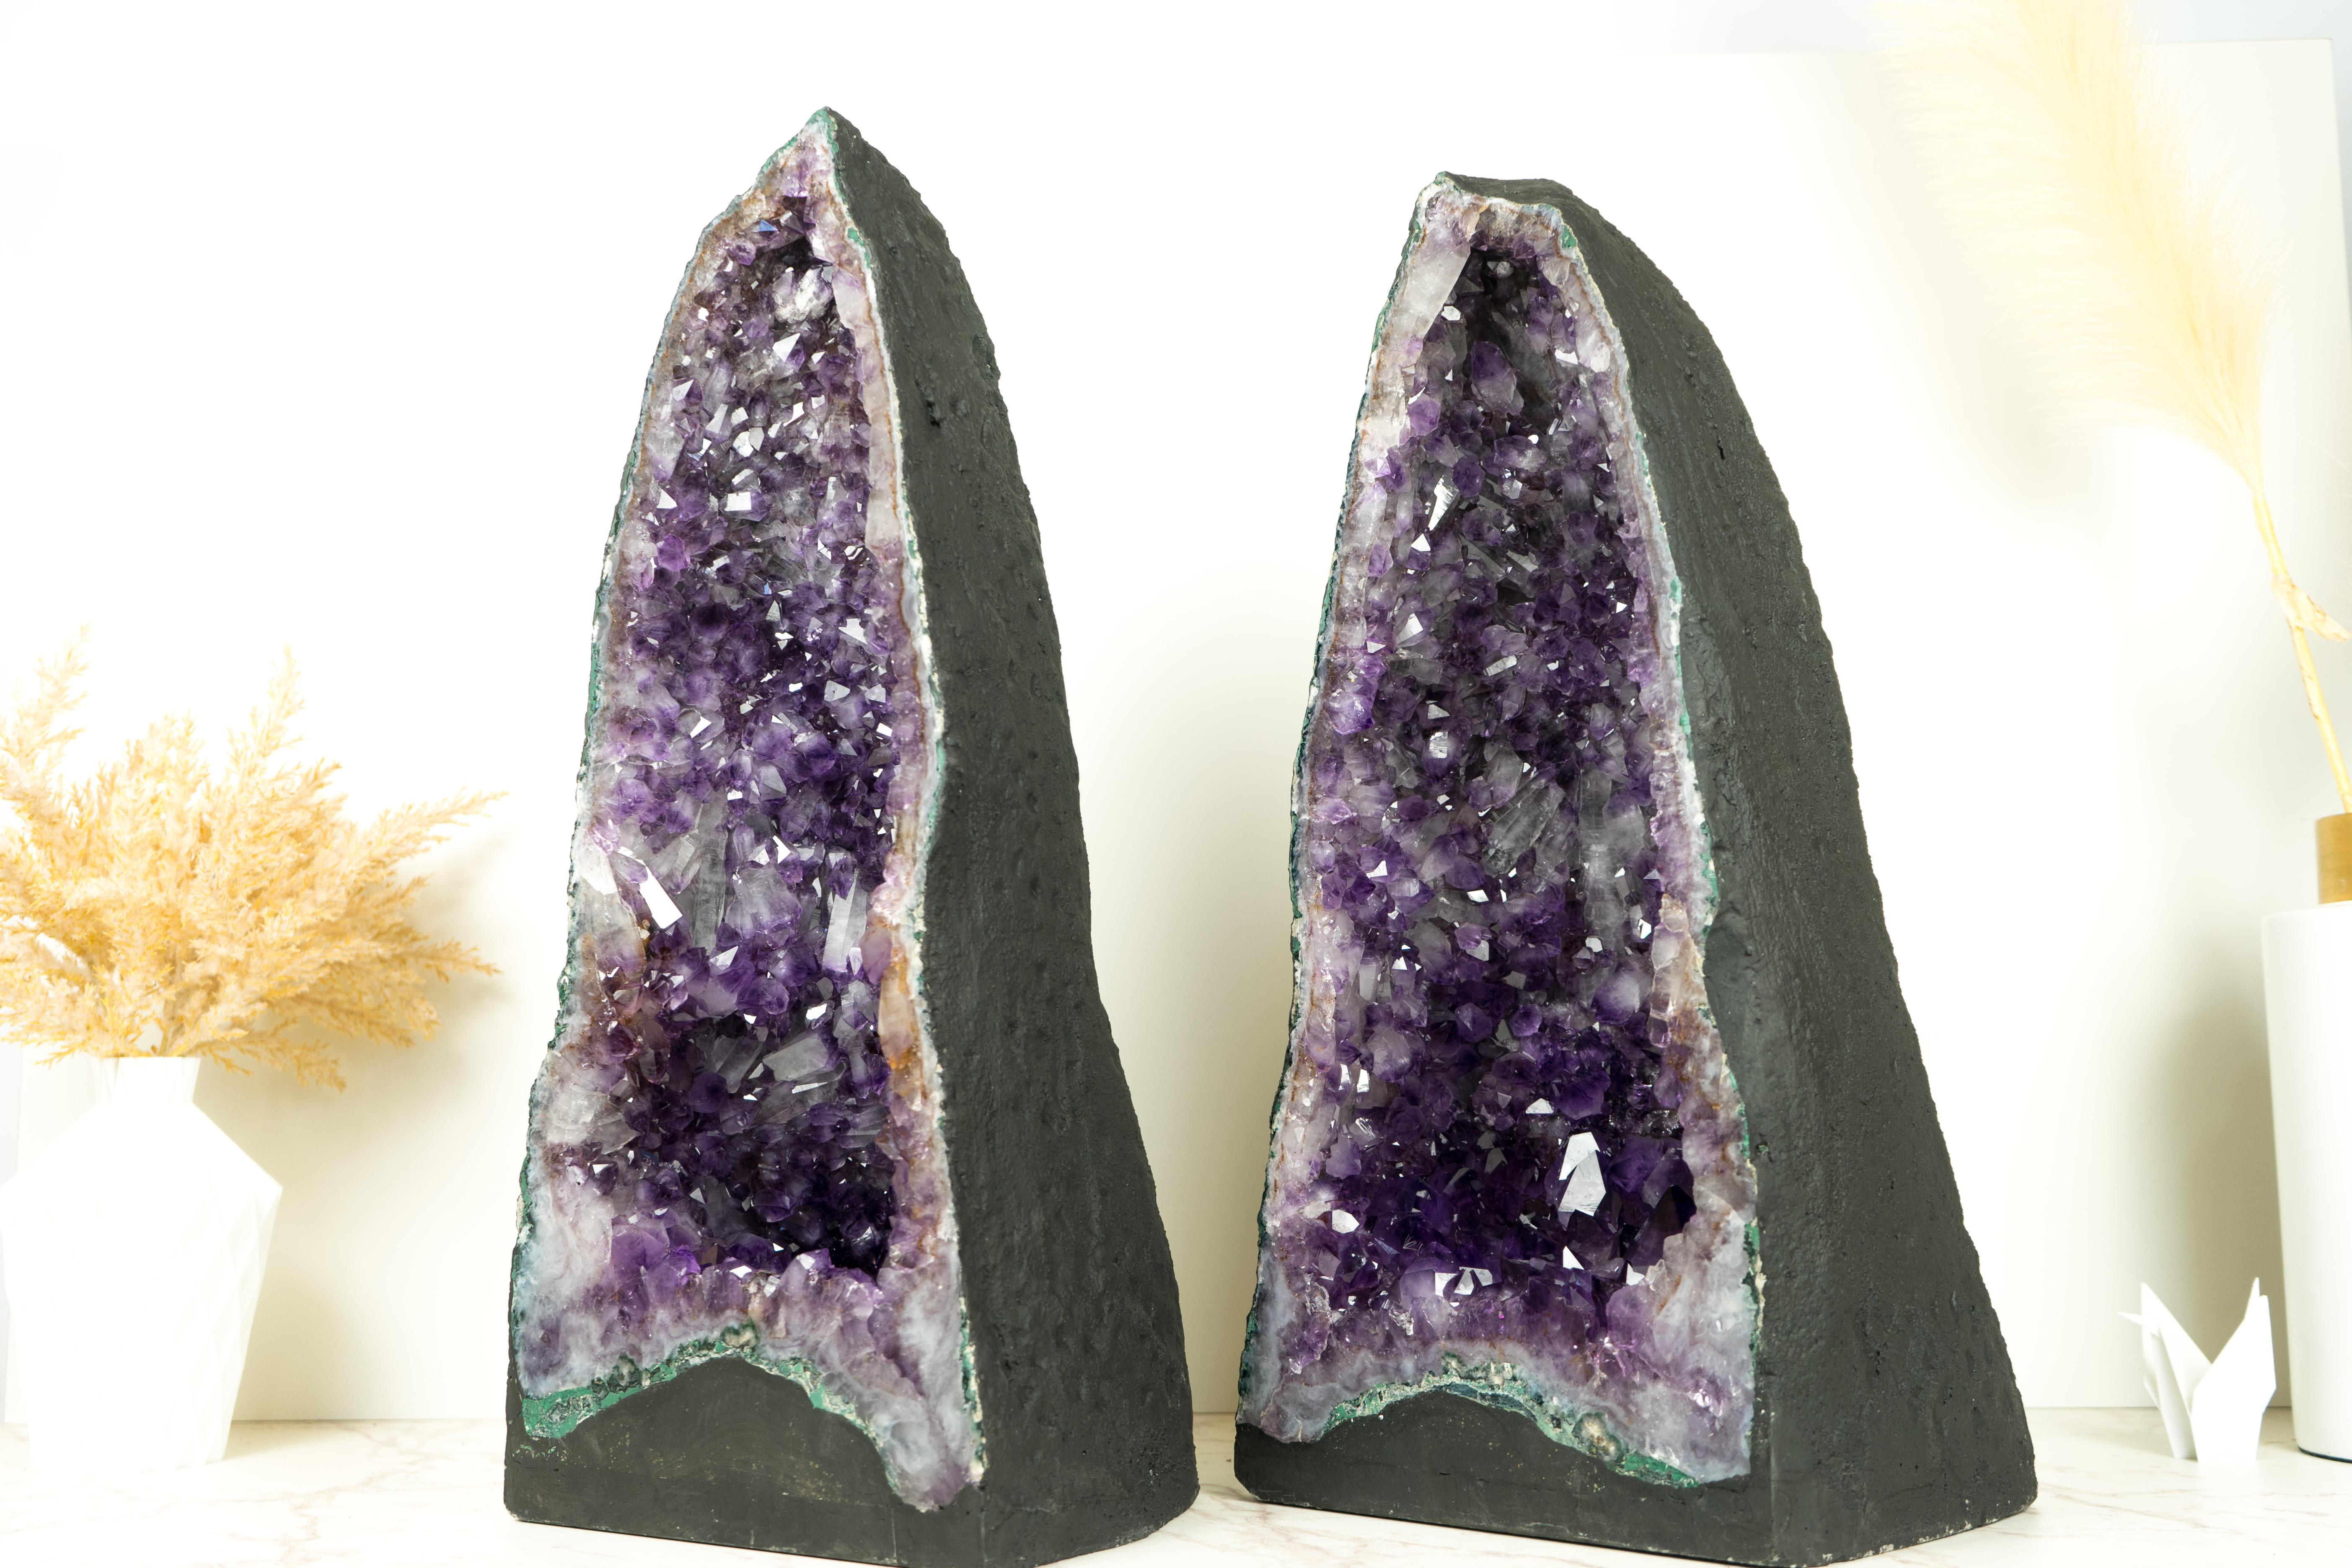 Pair of Tall Deep Purple Amethyst Crystal Geode Cathedrals, with Rare Druzy For Sale 2